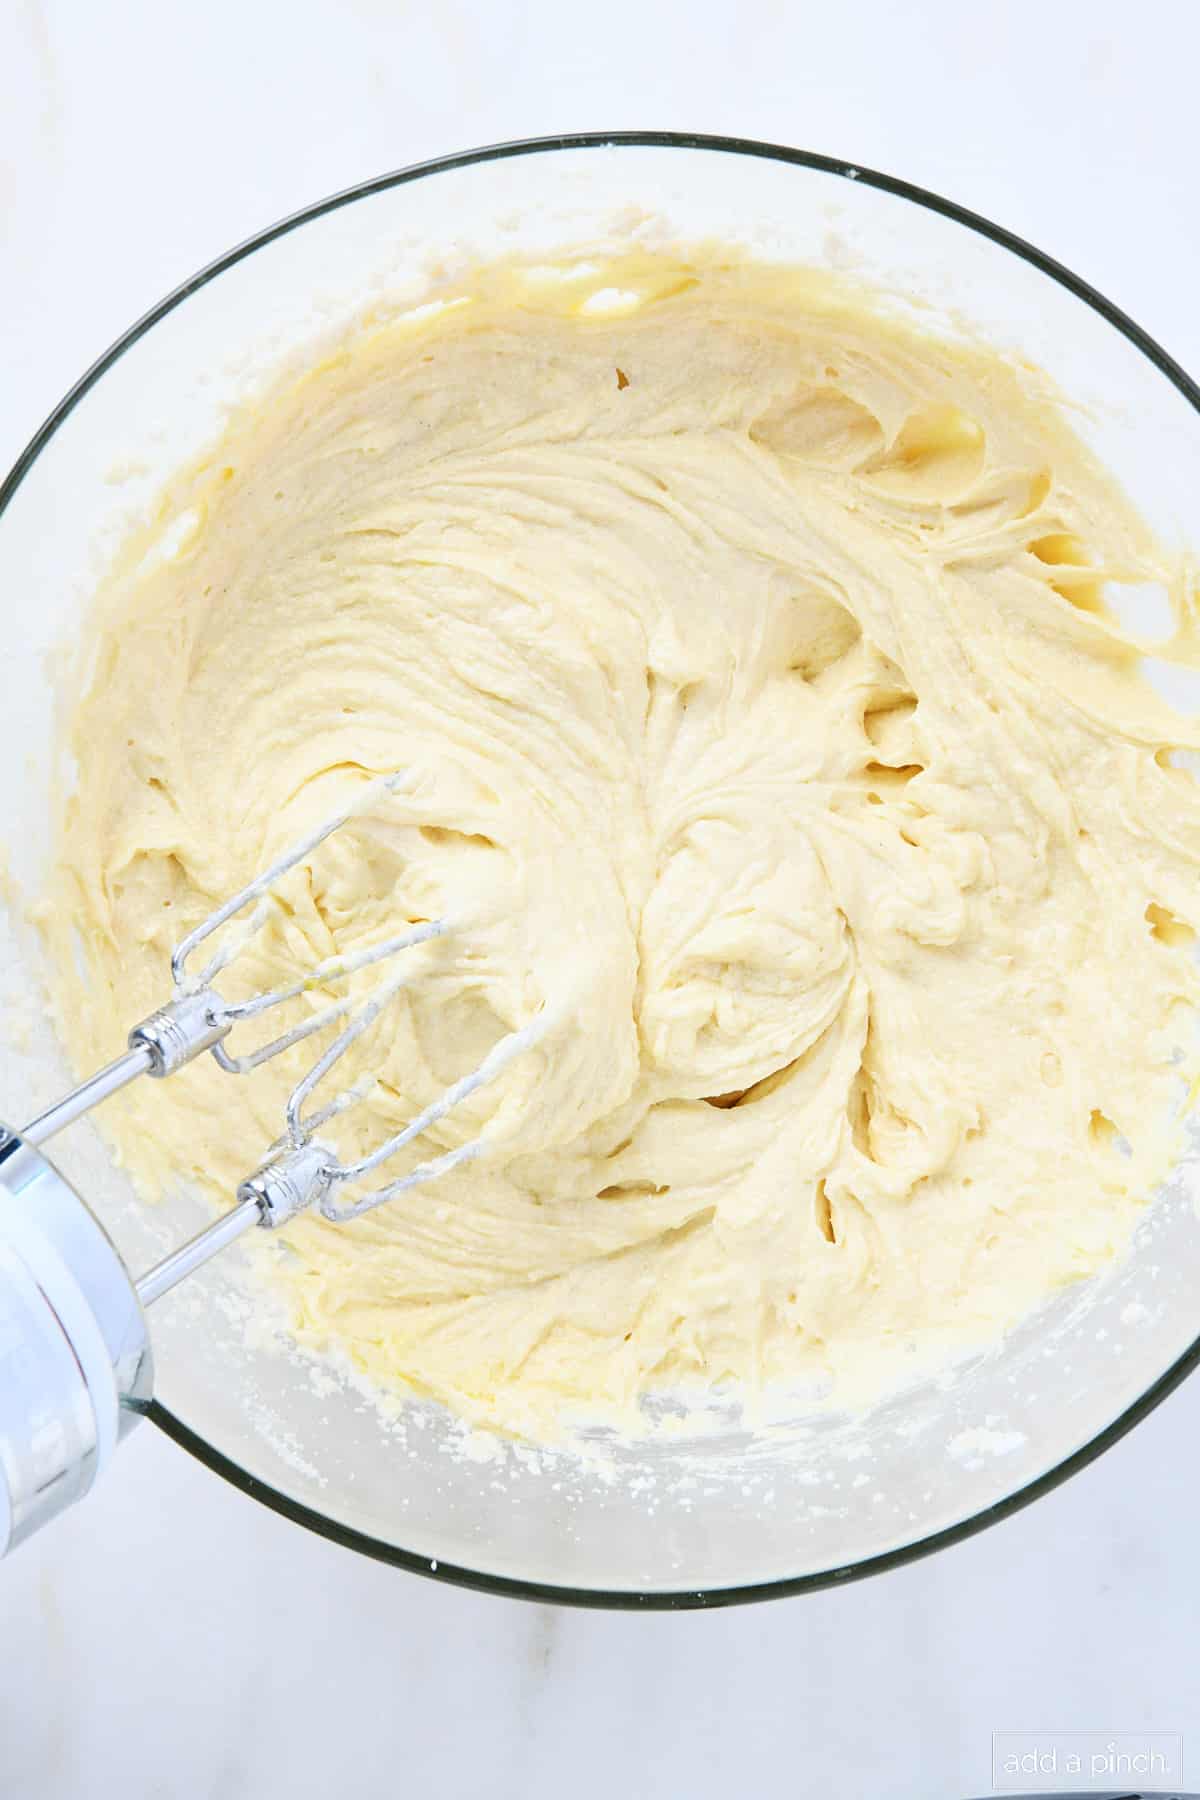 A hand mixer finishes mixing in the last egg into the pound cake batter in a glass mixing bowl.